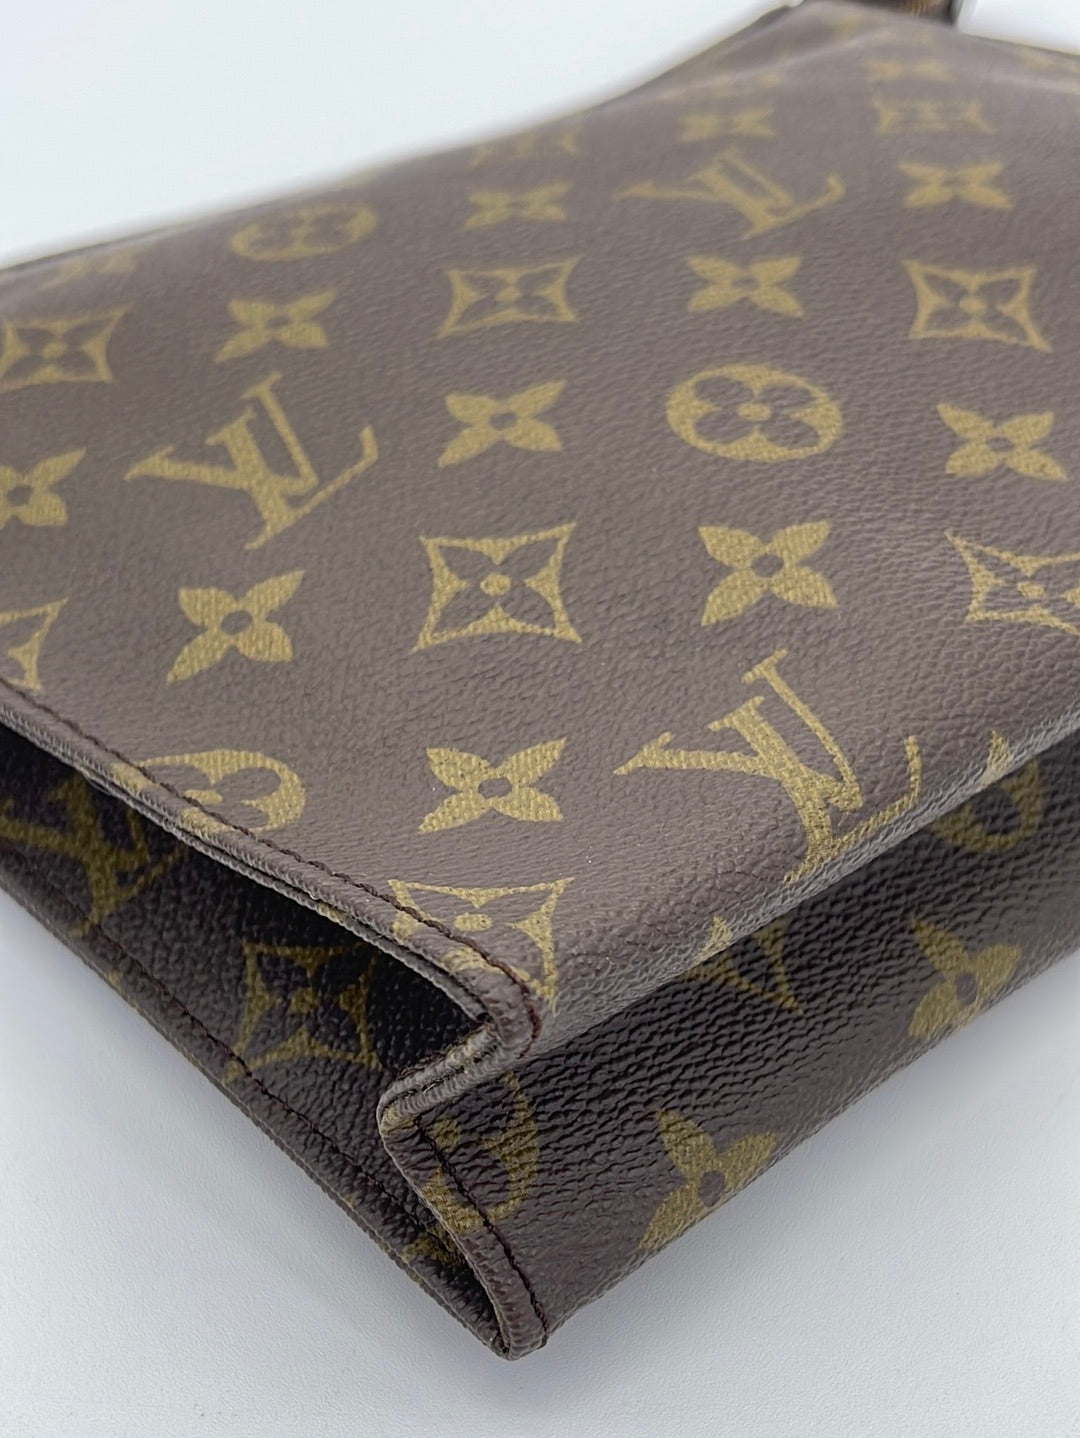 talking luxury – louis vuitton collections